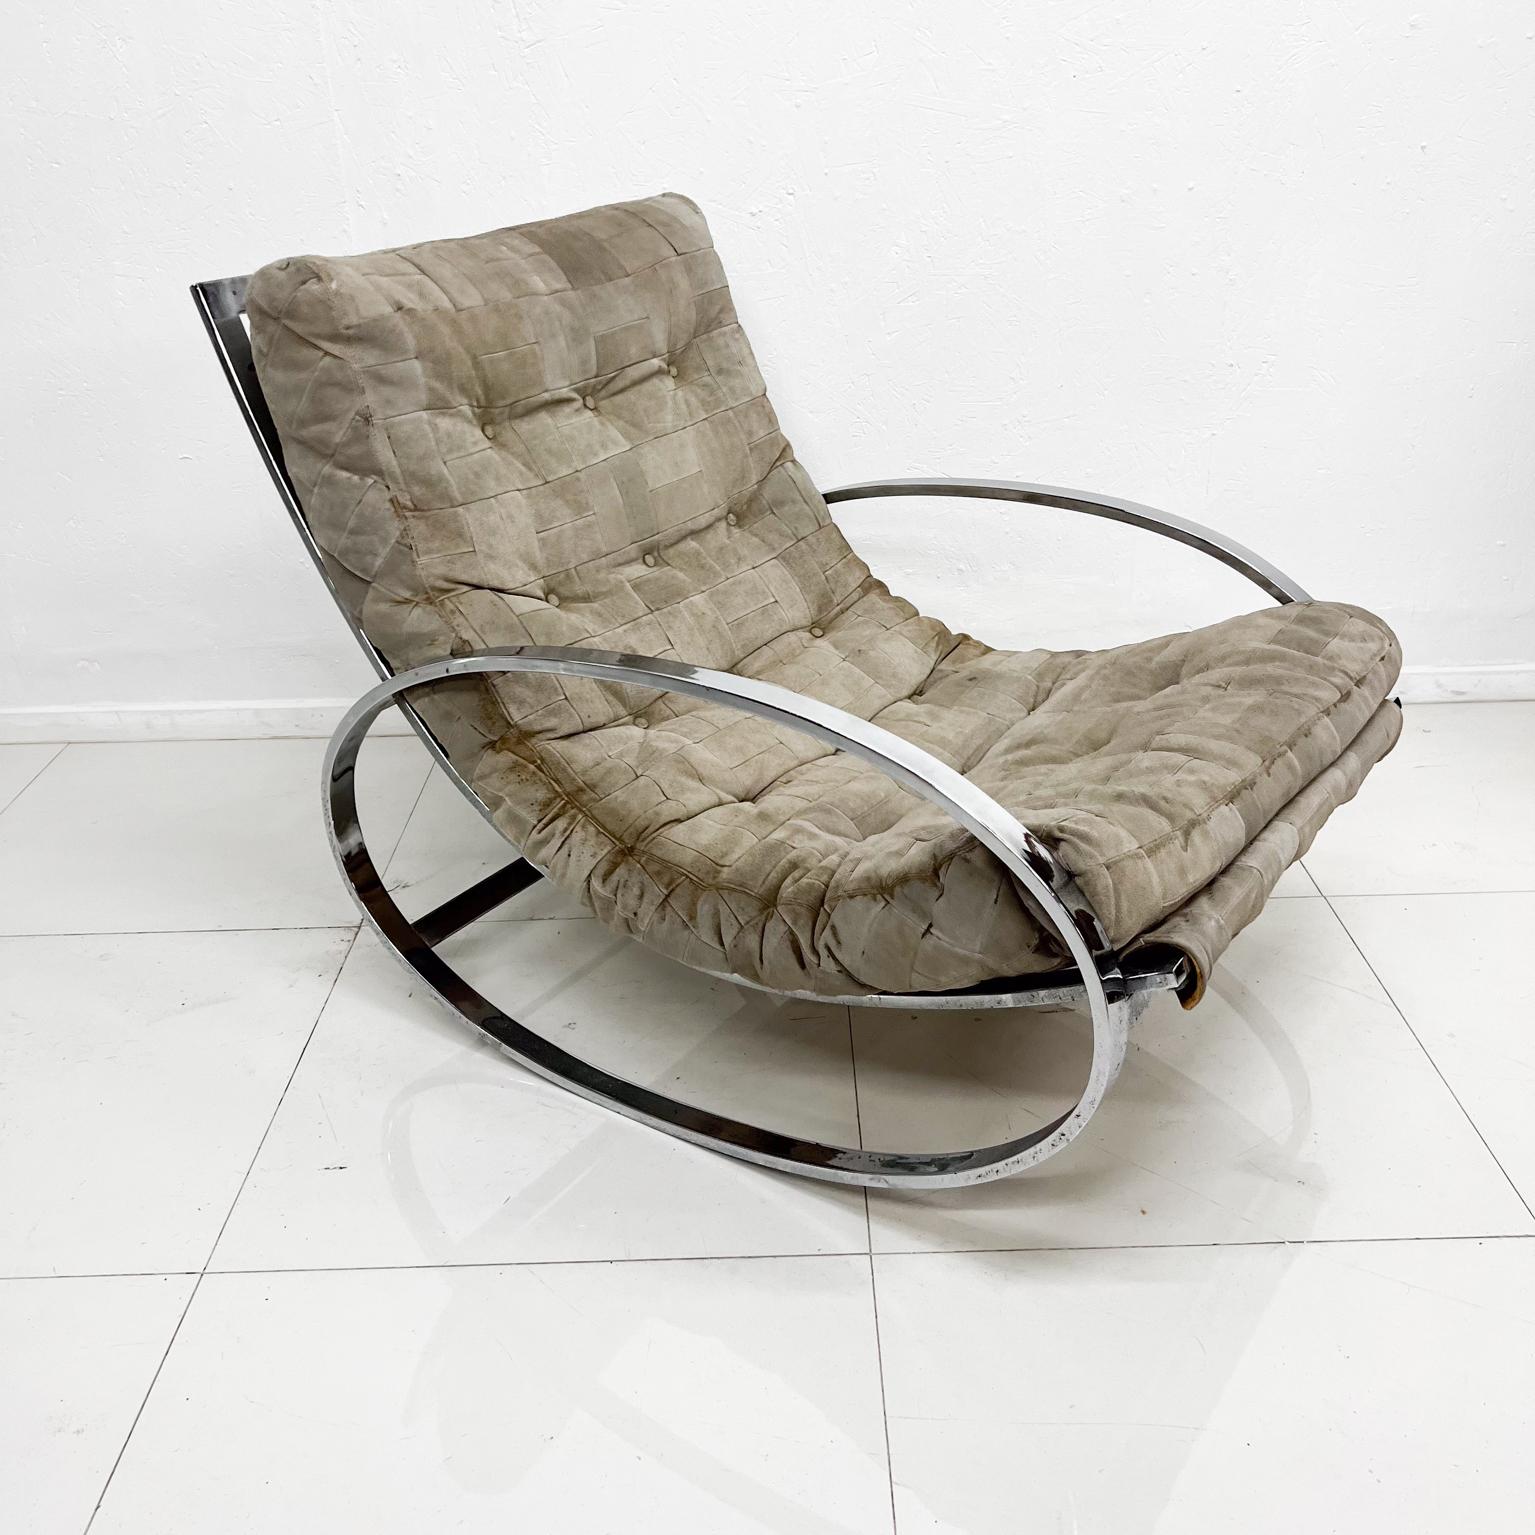 1970s Milo Baughman Style Chrome Hoop Ellipse Rocking Chair Renato Zevi
Modernist Rocker Tubular Steel for Selig Italy
Unmarked.
32 h x 42 d x 27.75 w Arm rest 19.63 Seat 15.75 h
Unrestored original preowned vintage condition.
Wear to the fabric as